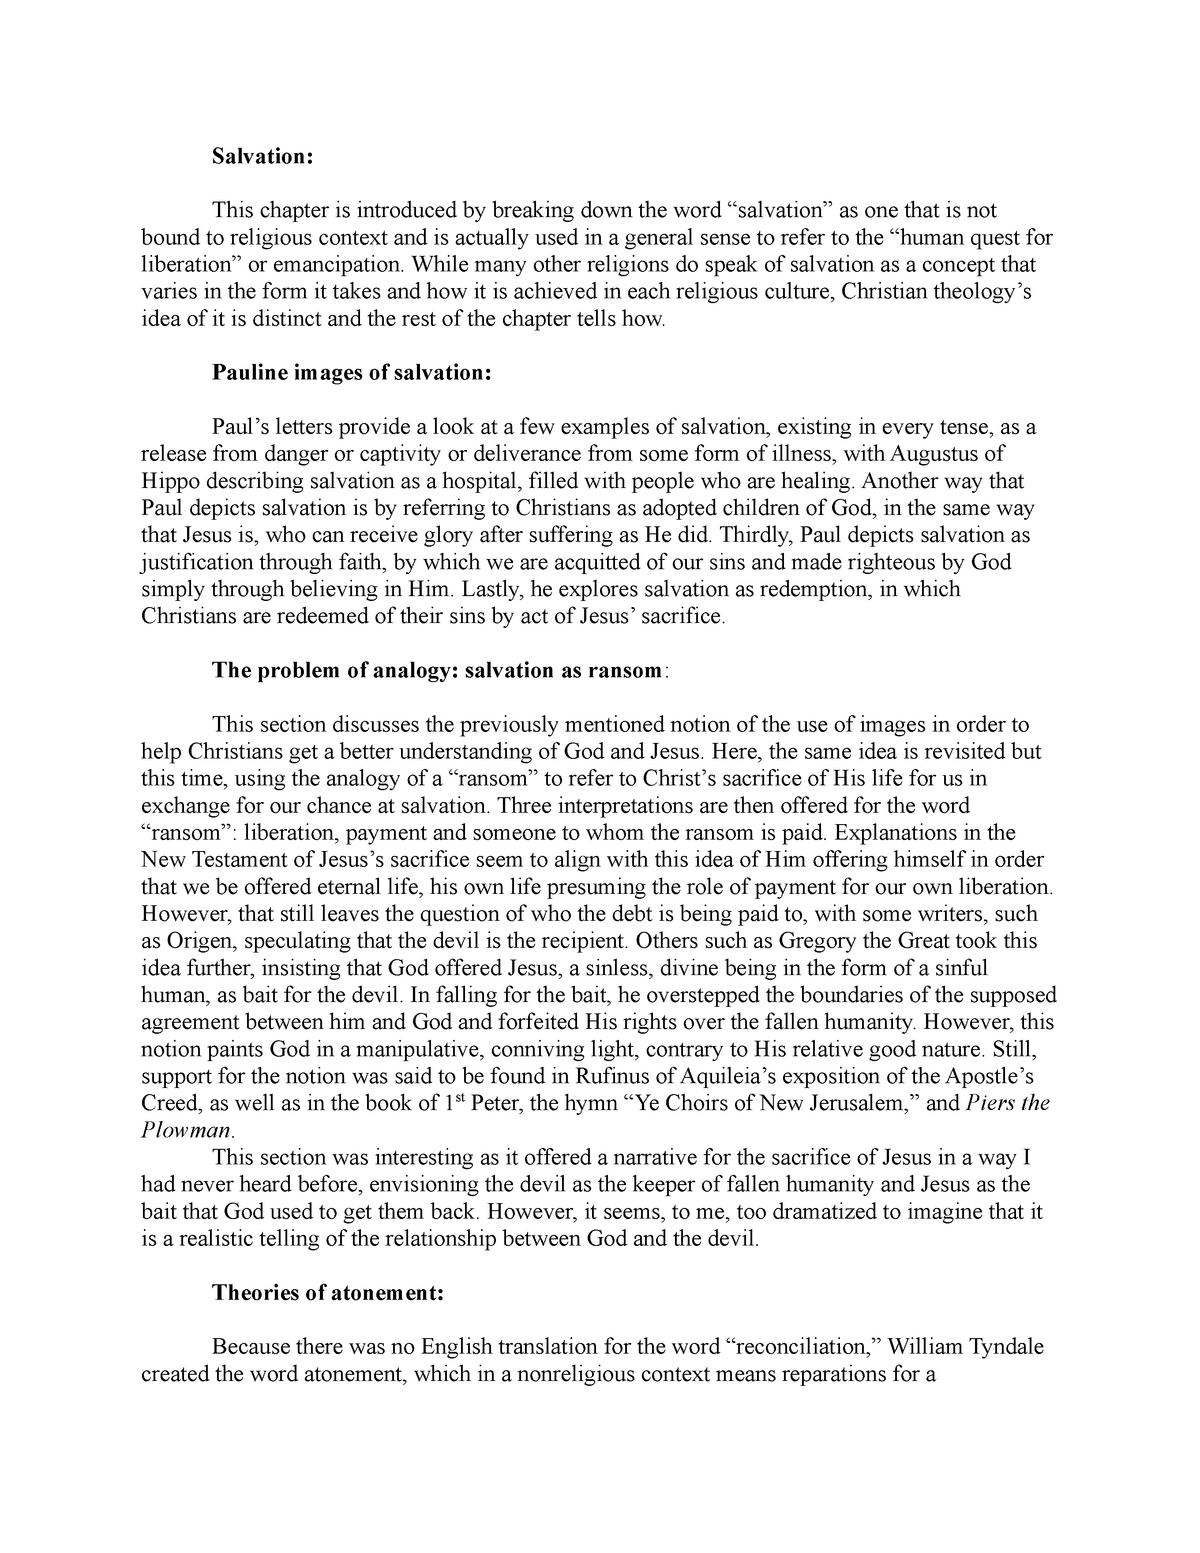 essay about salvation